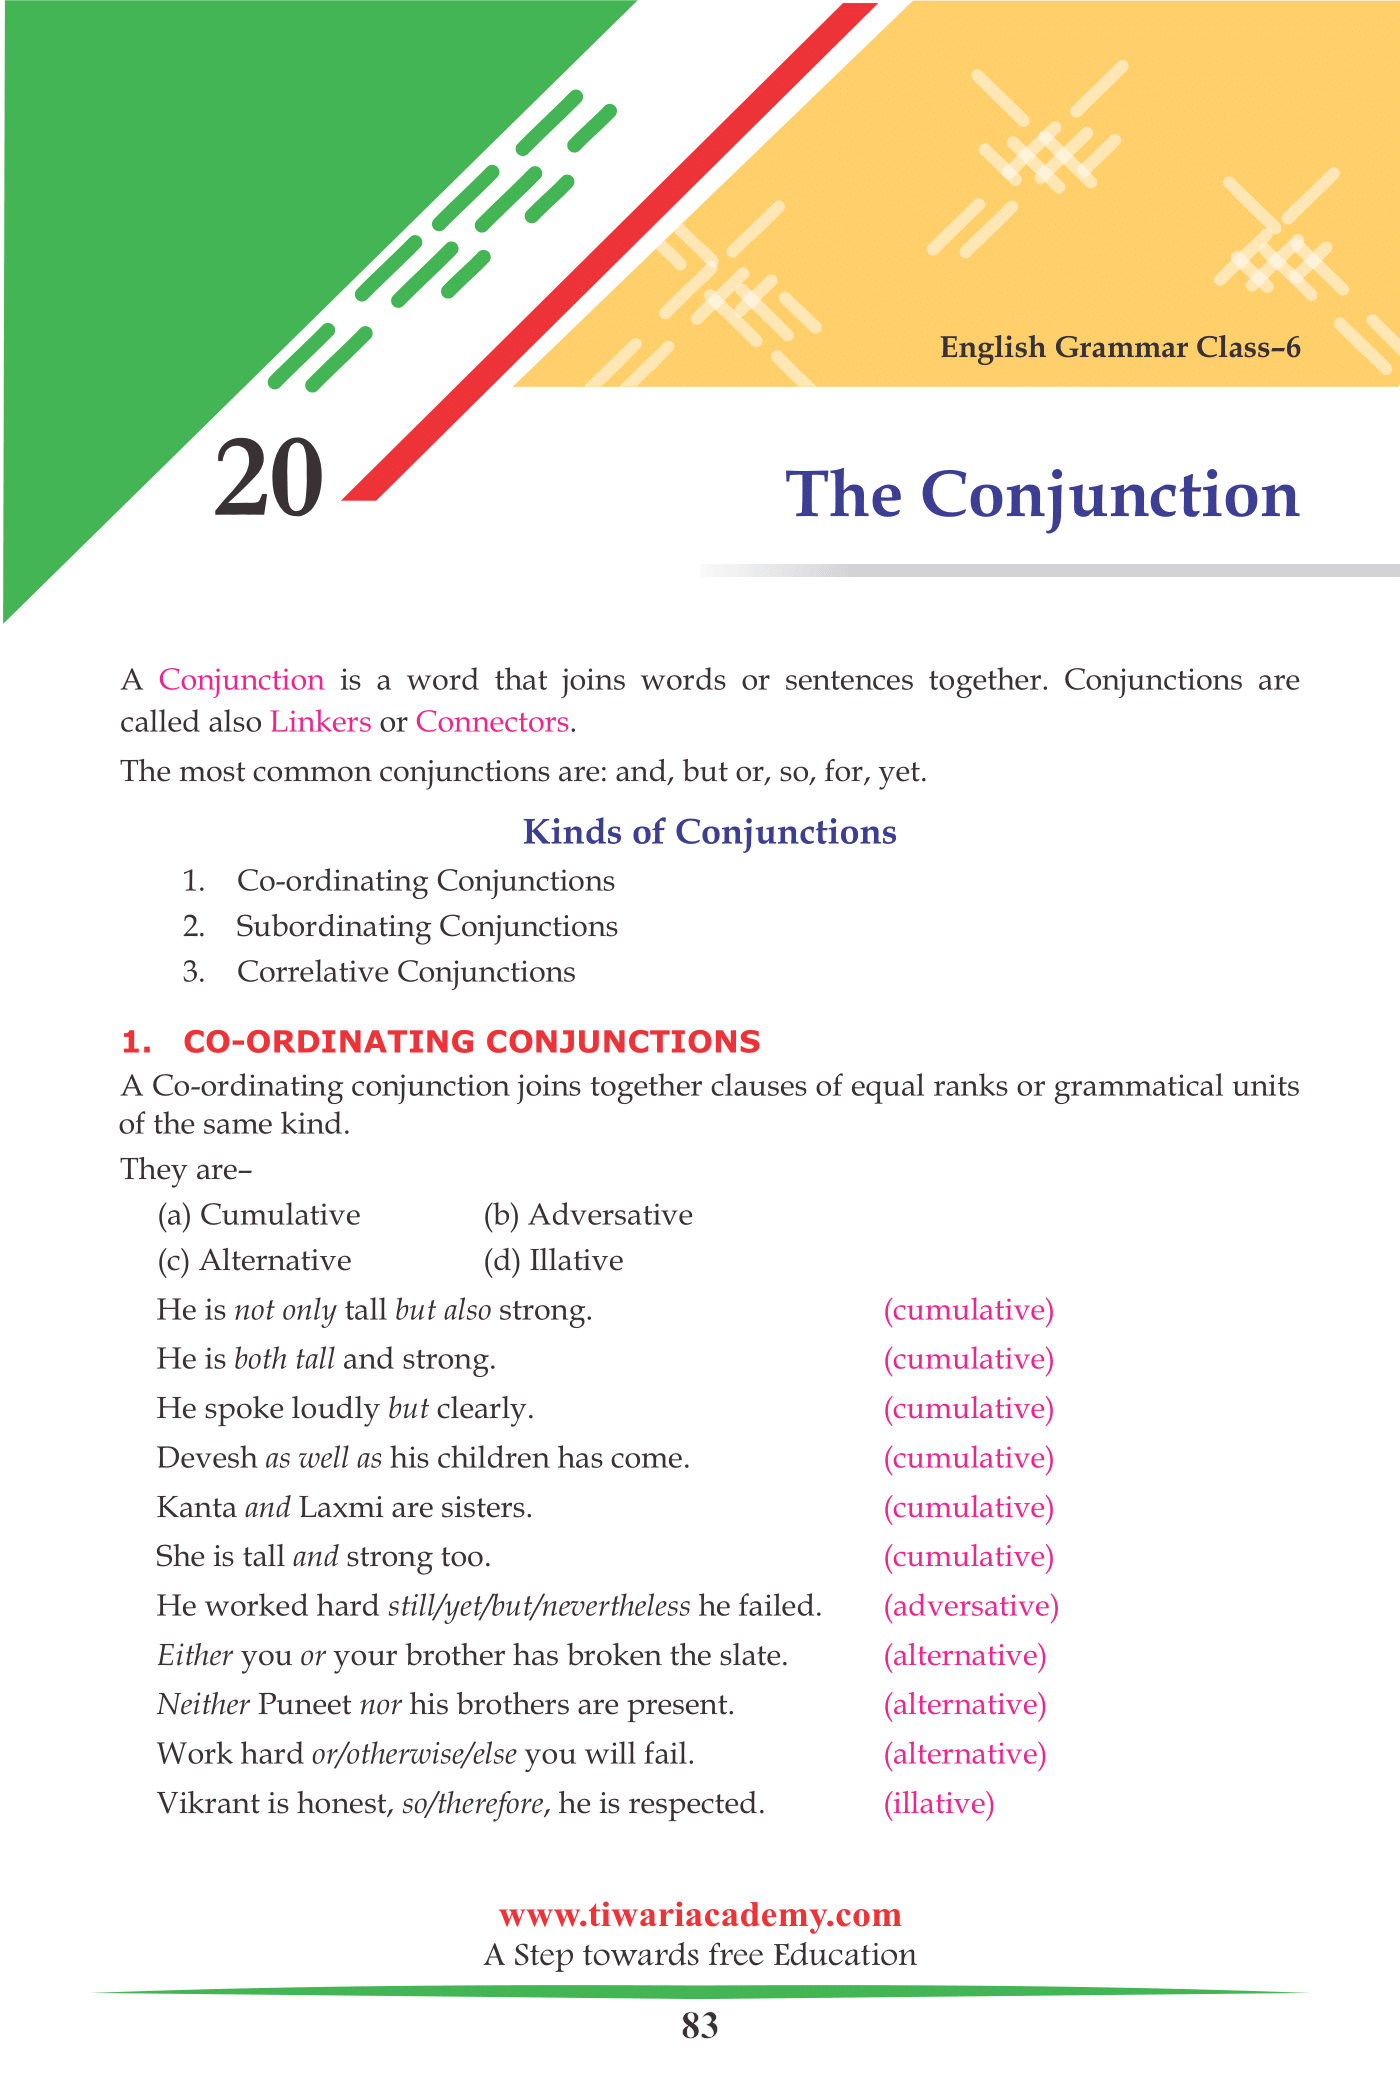 Class 6 English Grammar Chapter 20 Conjunctions